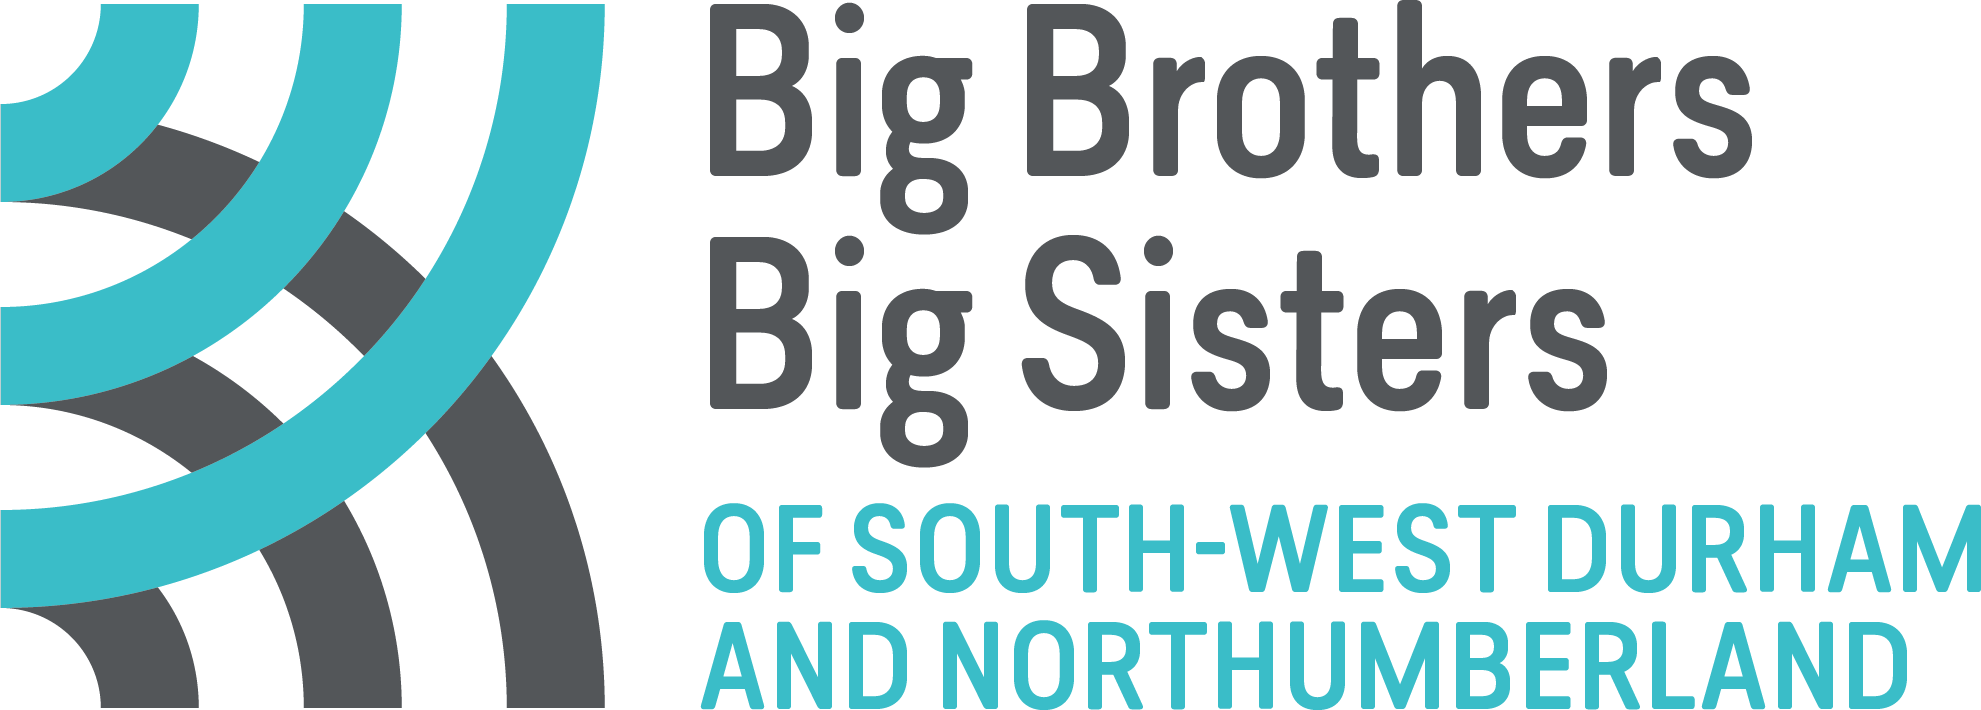 Big Brothers Big Sisters South-West Durham and Northumberland